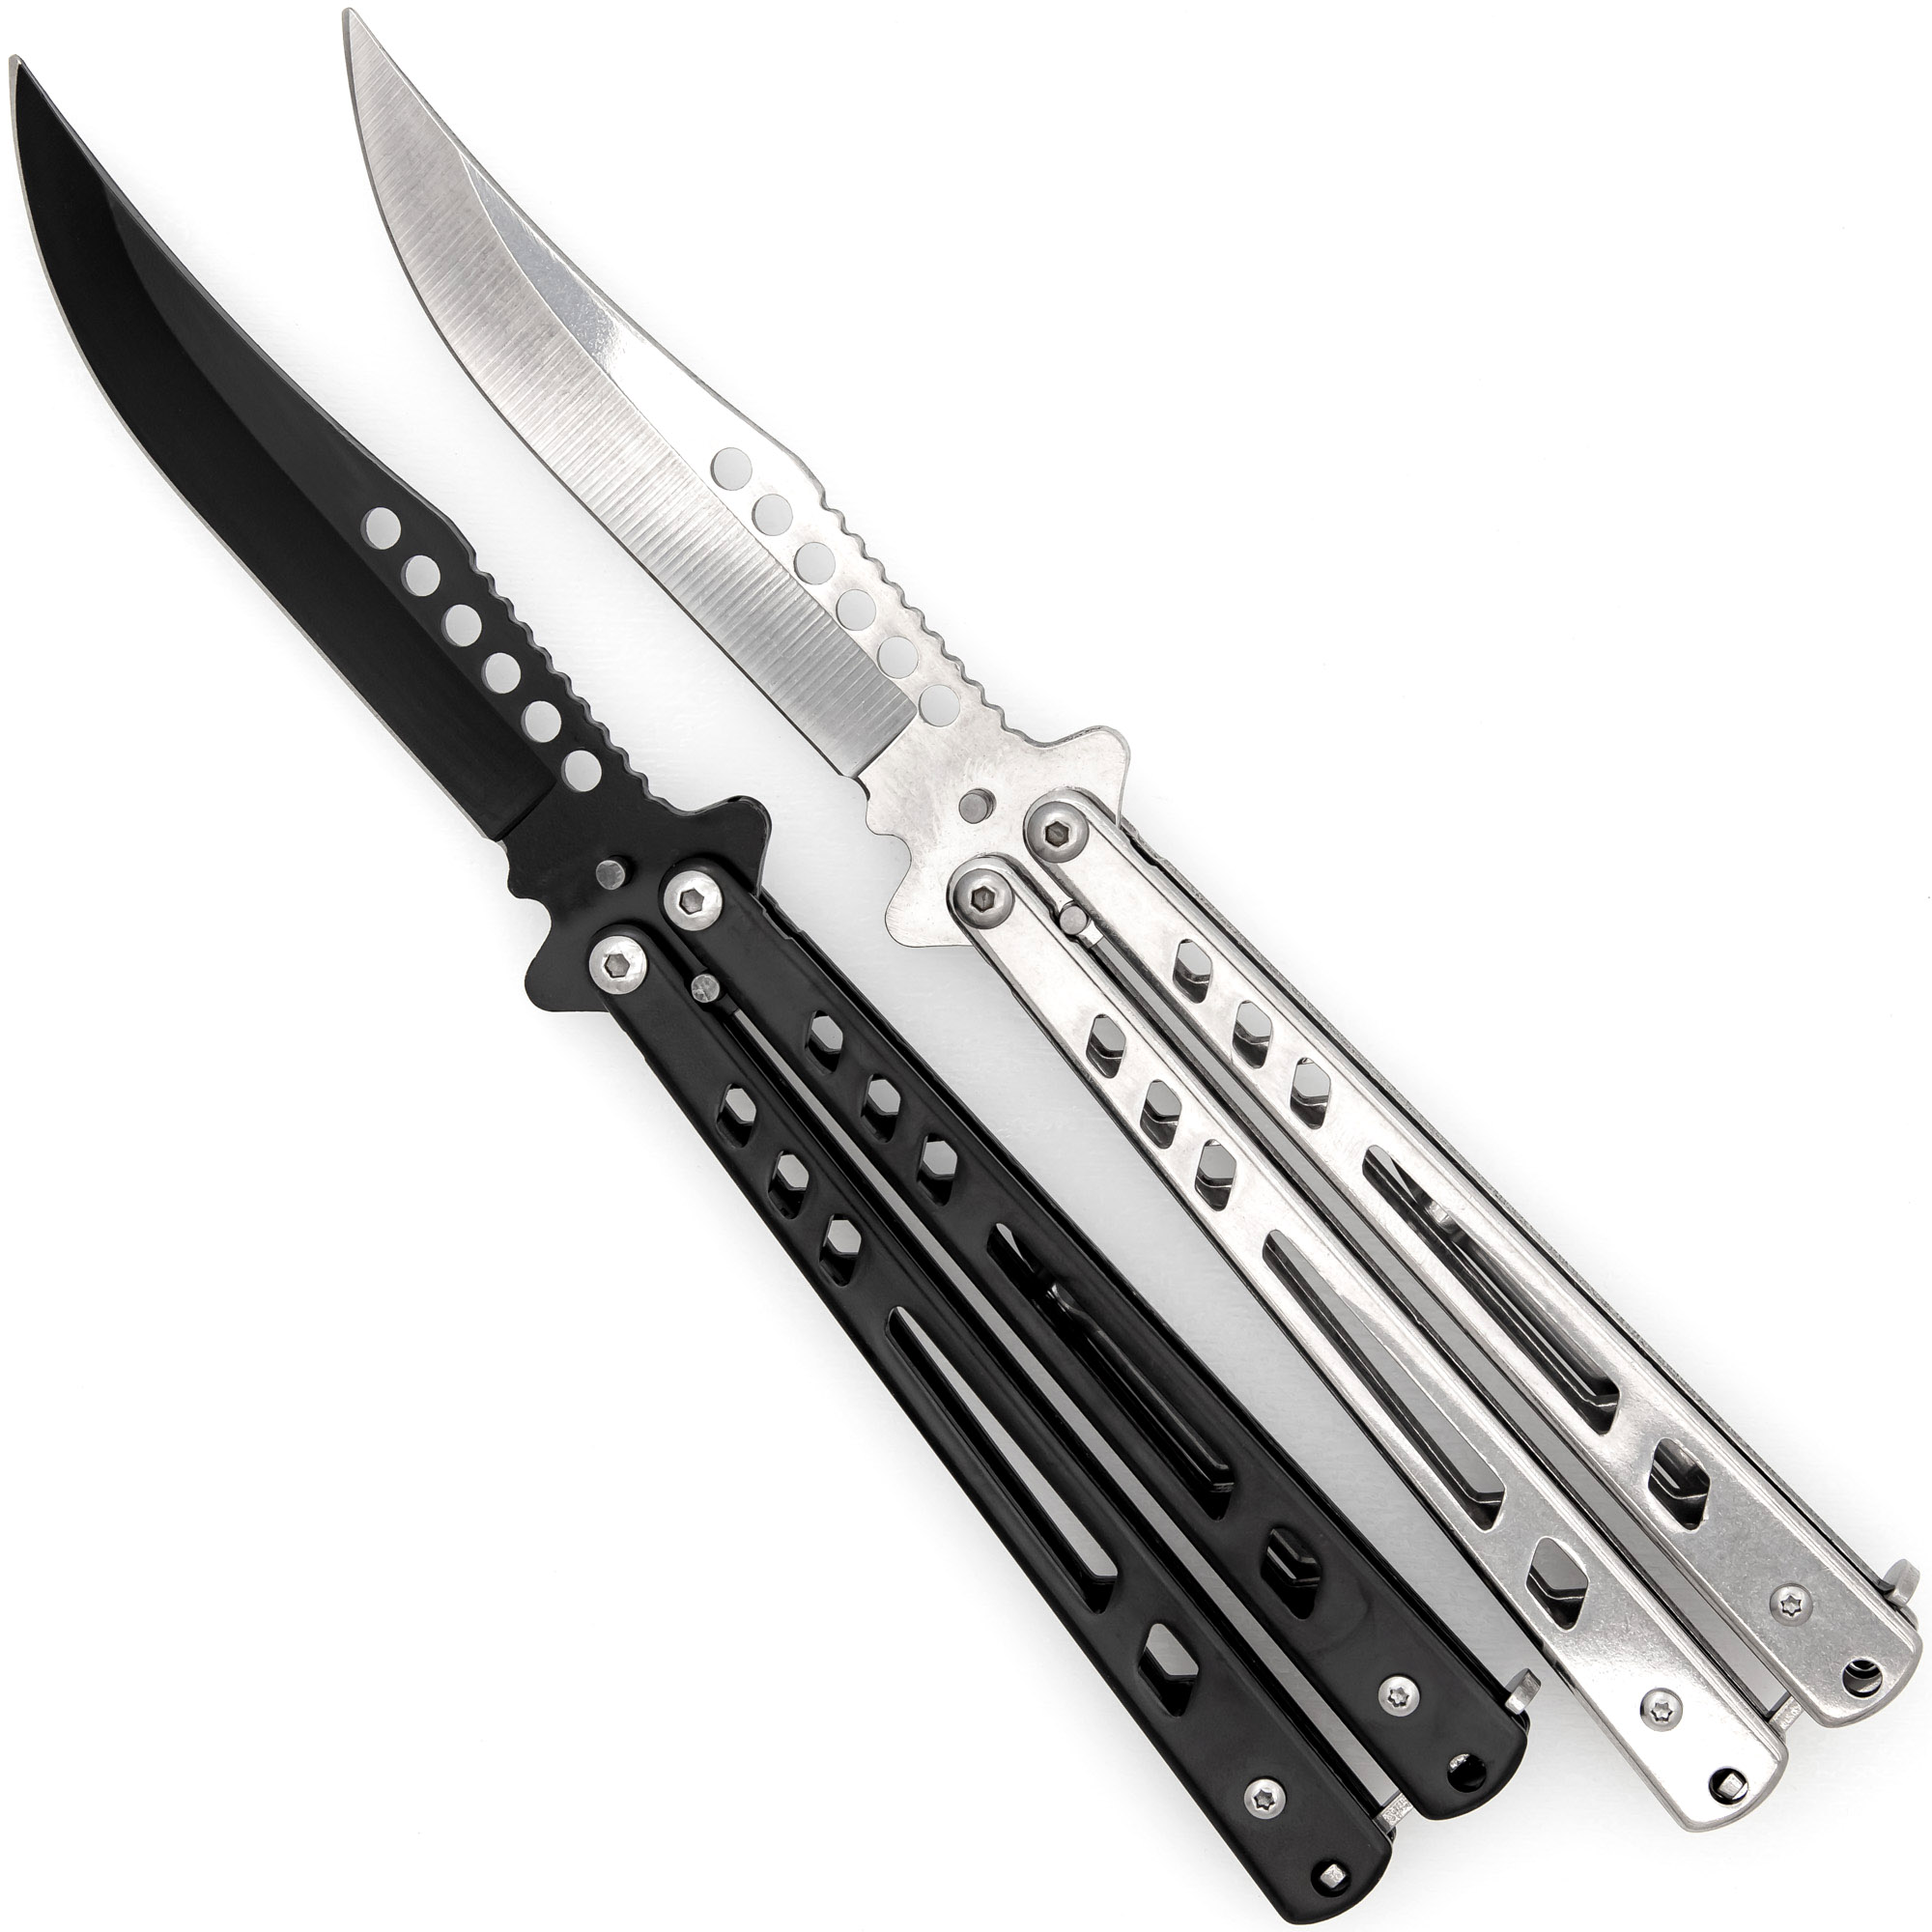 Shoots & Ladders Clip Point Balisong Butterfly Knife with Pocket Clip